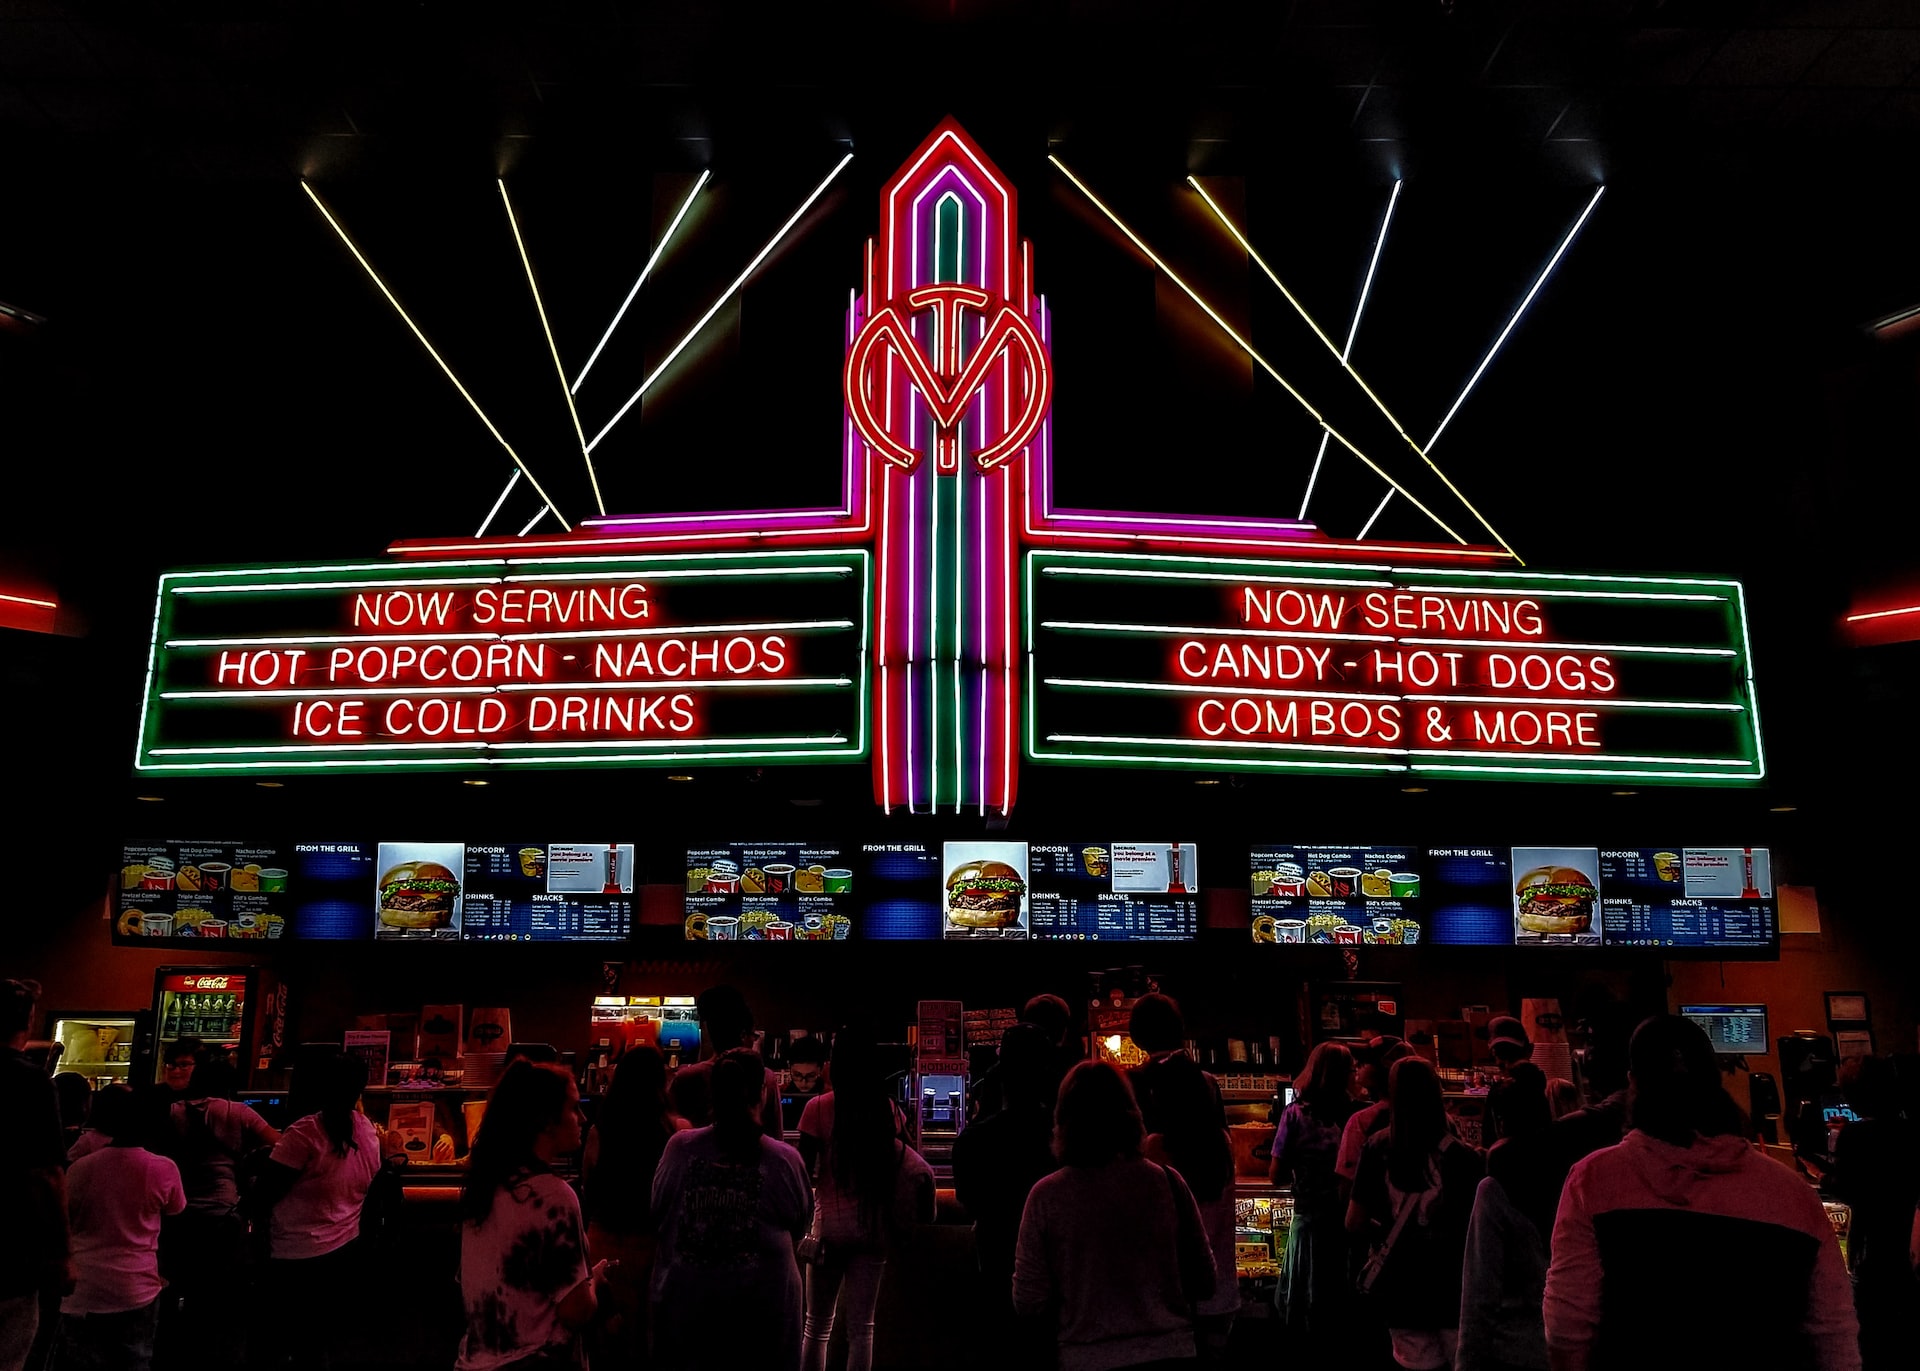 Movie theater concession lit up with neon lights.